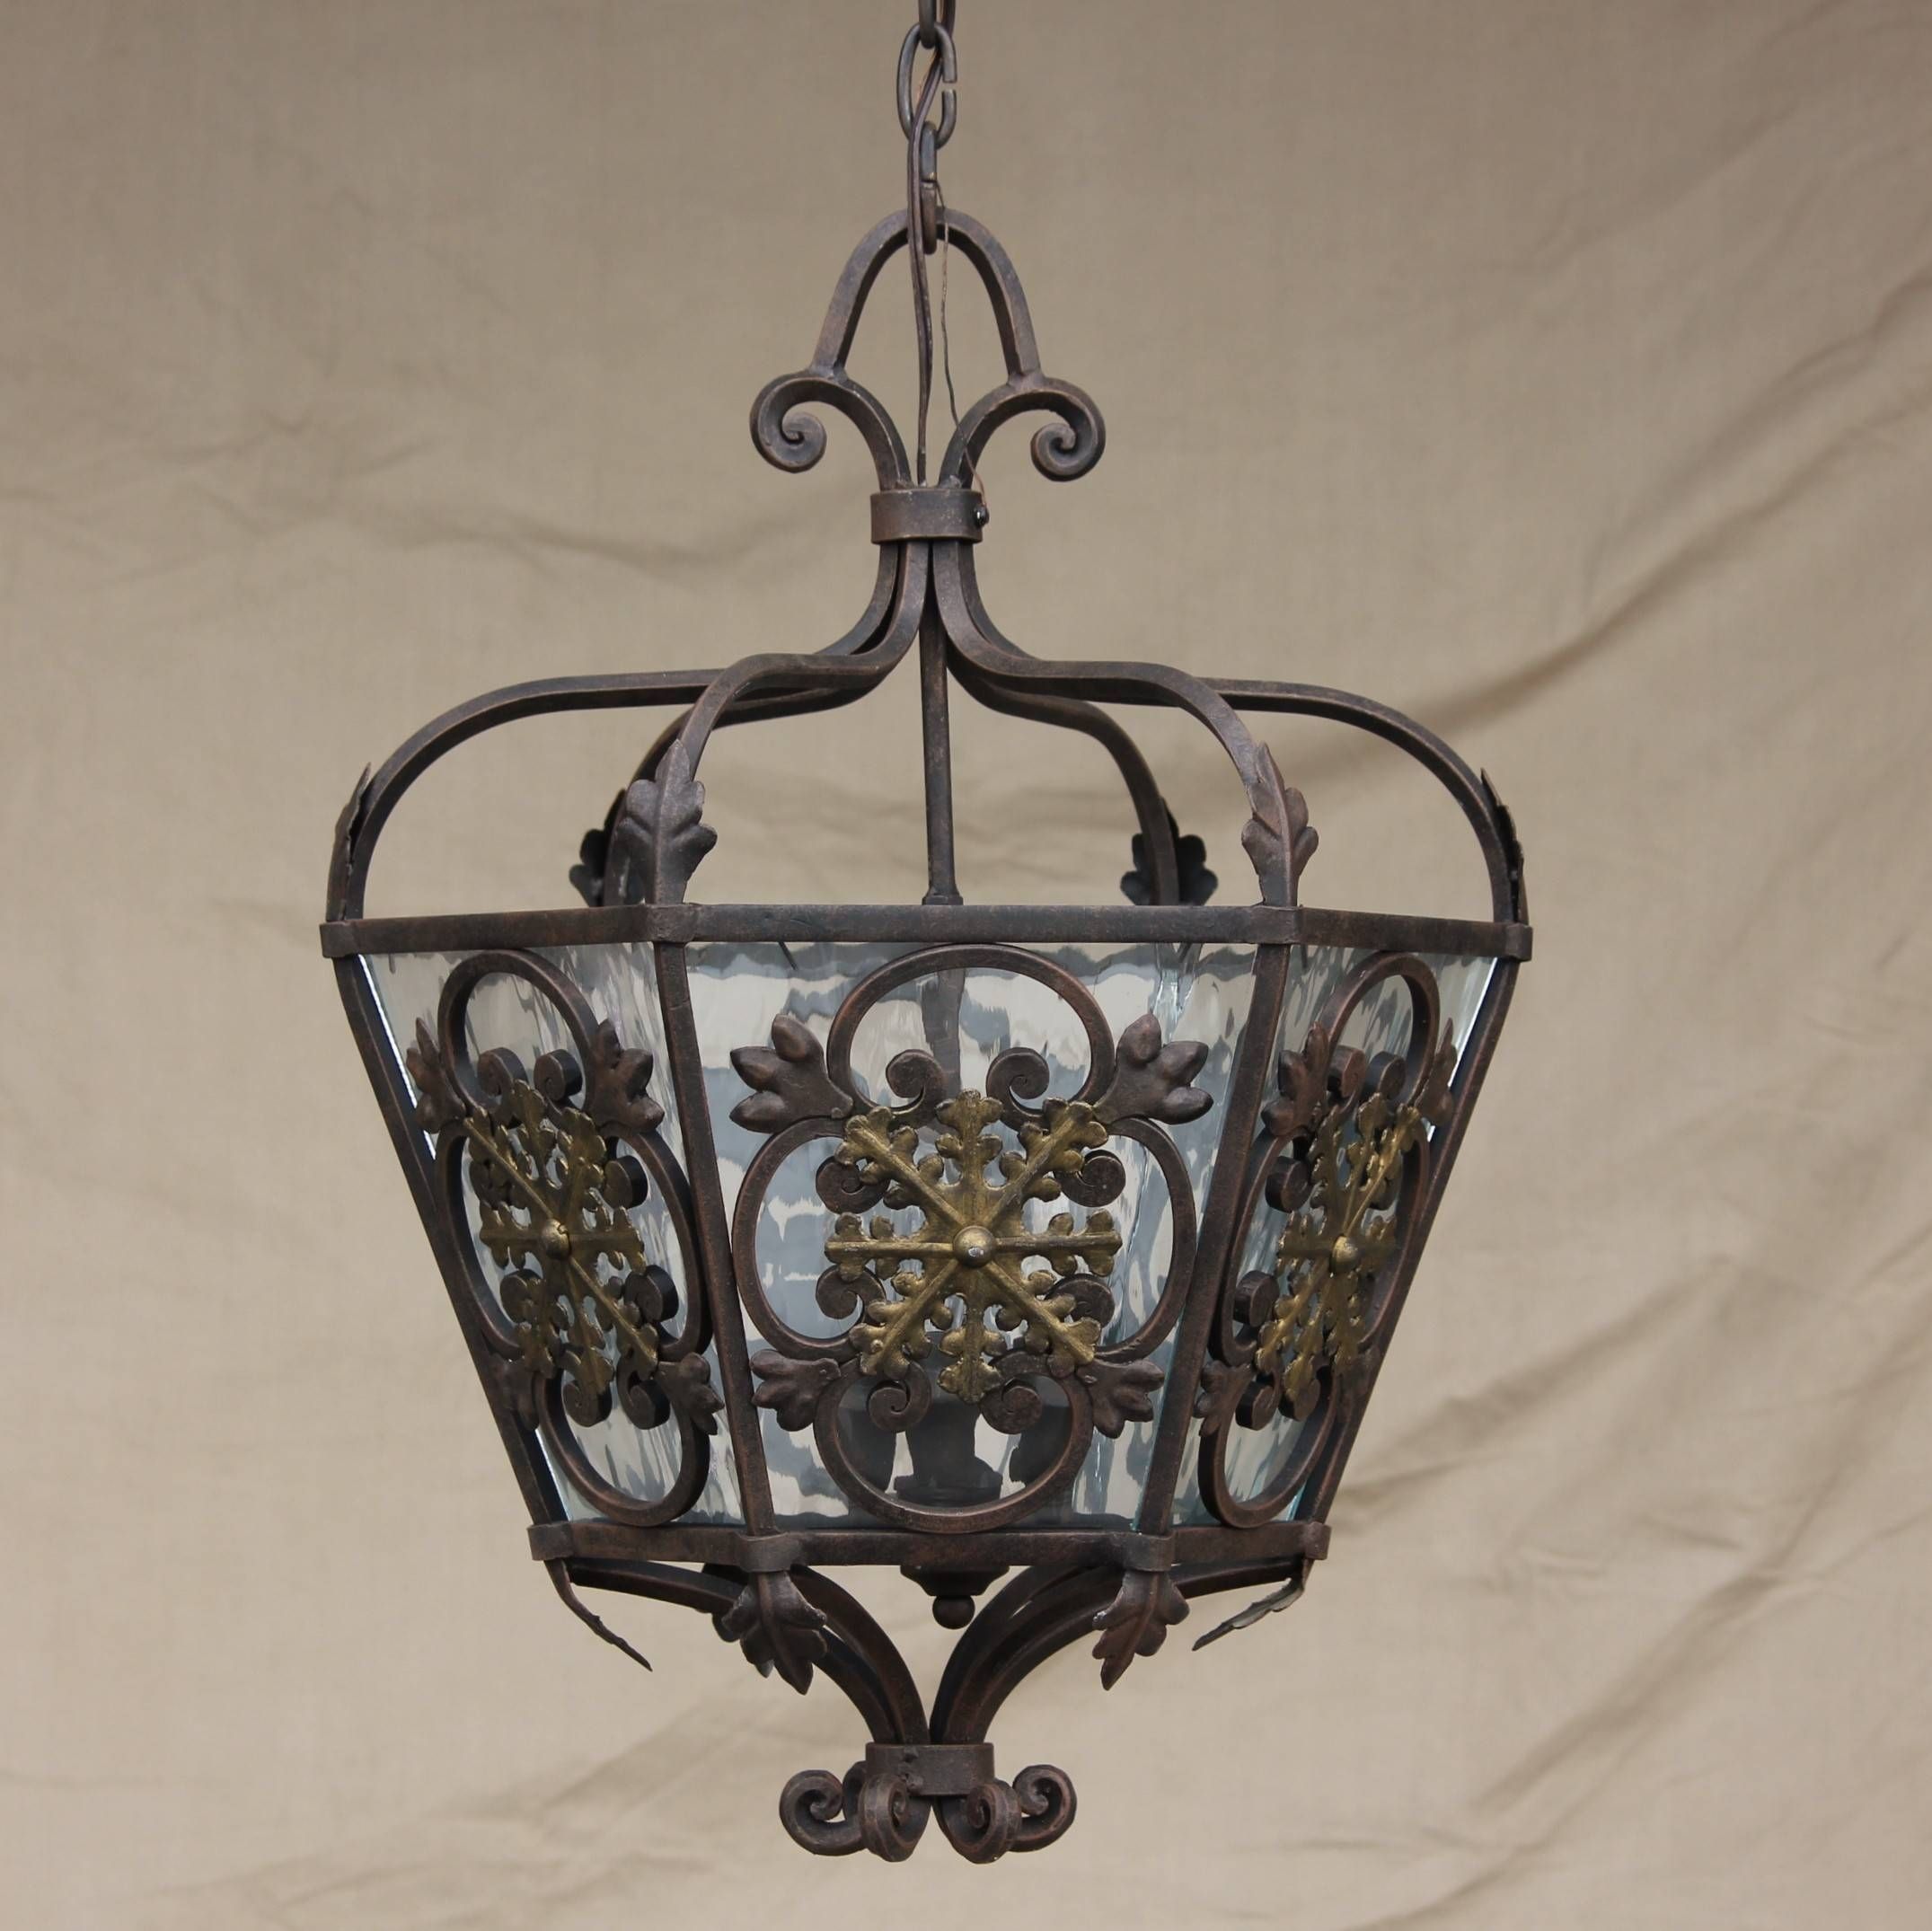 Amazing Wrought Iron Ceiling Lights 33 With Additional Copper Mini For Wrought Iron Mini Pendant Lights (View 2 of 15)